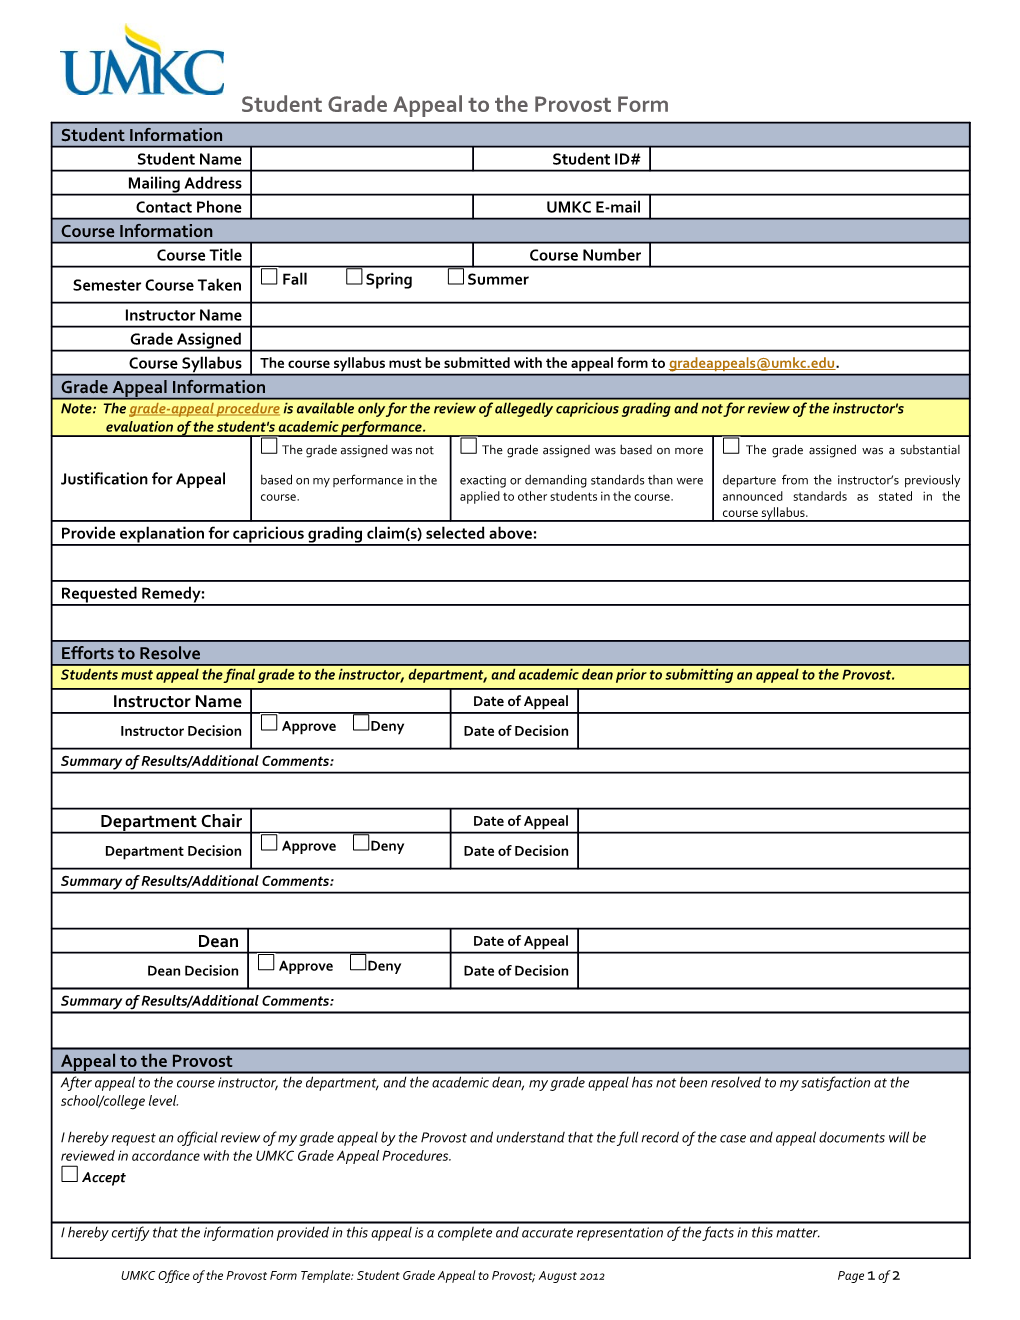 UMKC Office of the Provost Form Template: Student Grade Appeal to Provost; August 2012Page